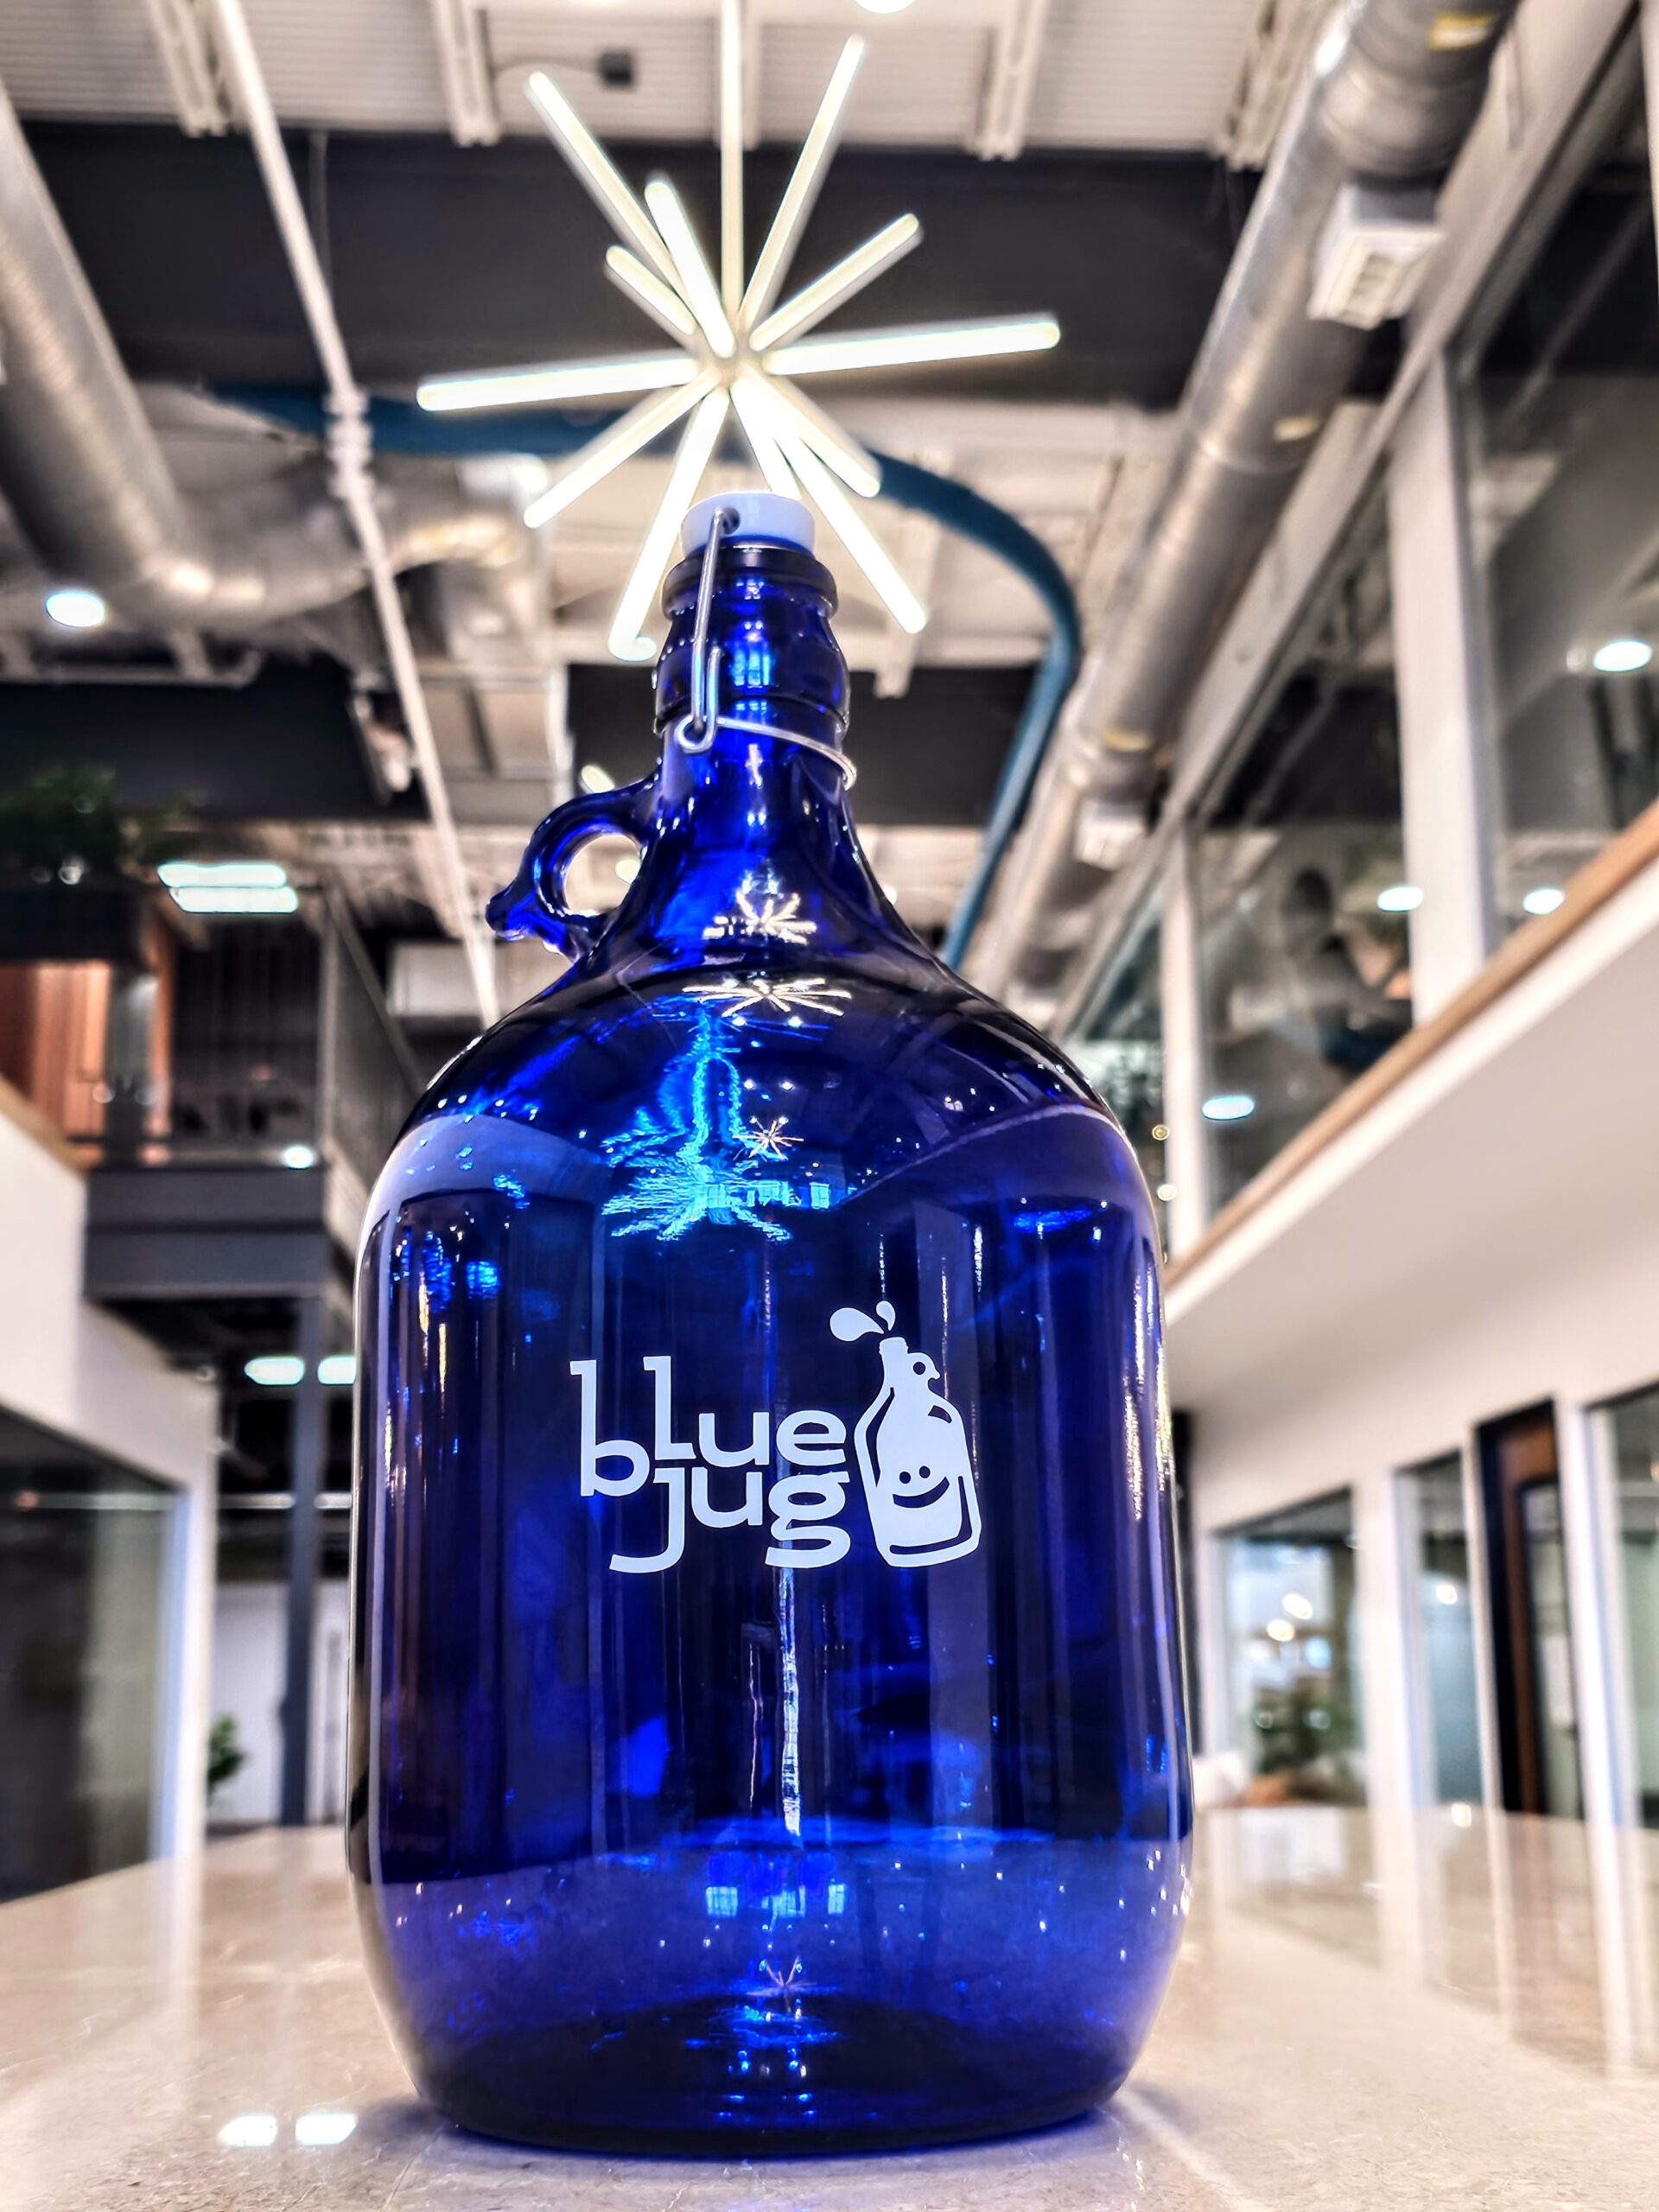 A dark blue bottle placed on tiles under the factory with heavy lights, featuring the "Blue Jug Waco" logo